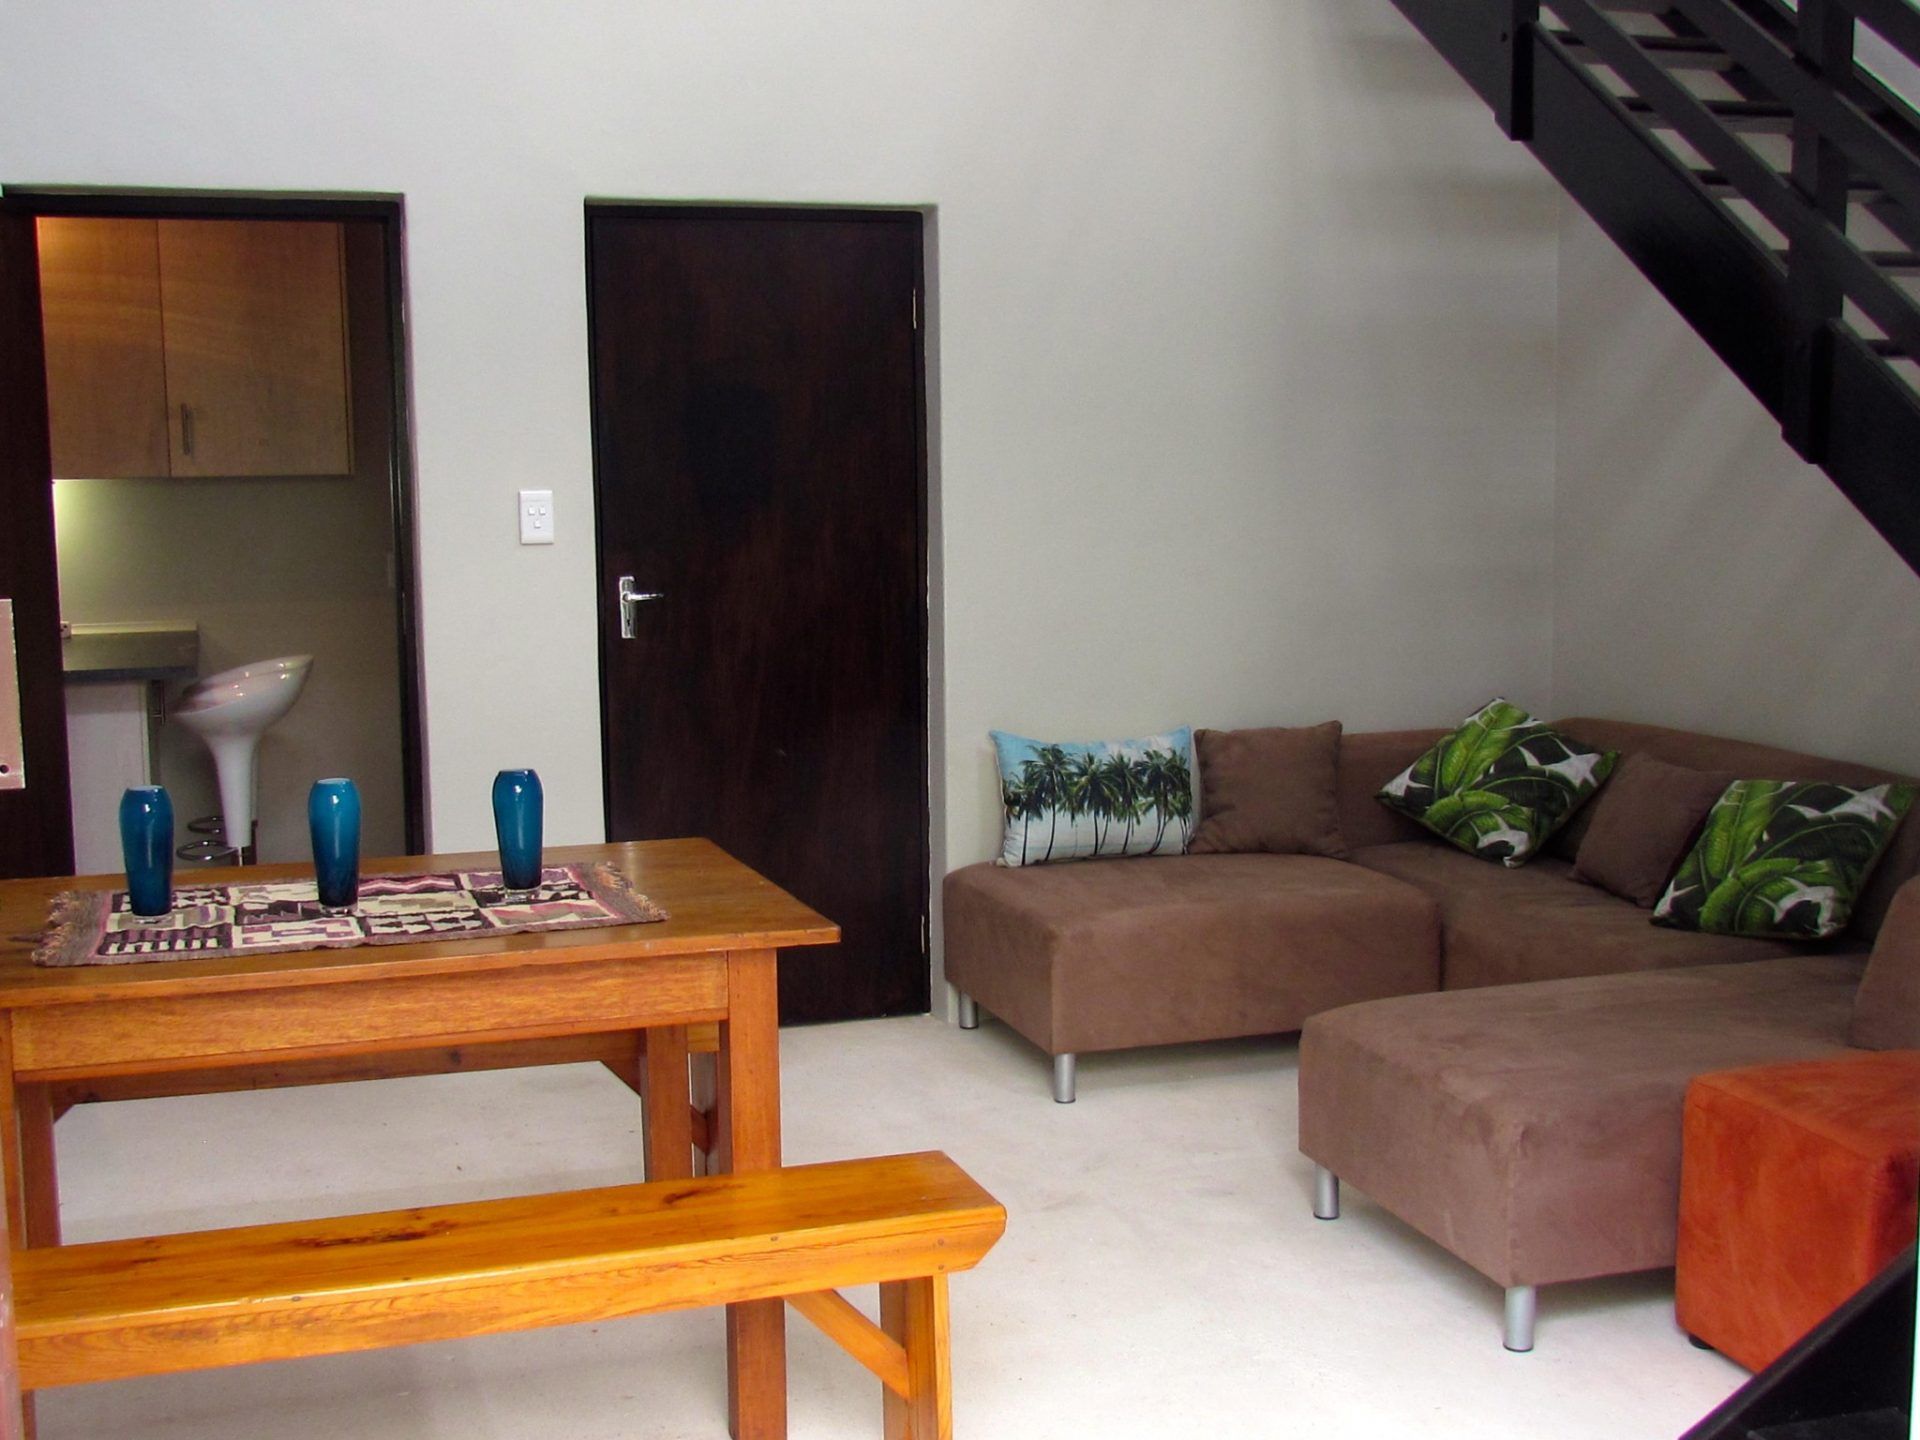 Photo 4 of The Loft accommodation in Camps Bay, Cape Town with 2 bedrooms and 1 bathrooms